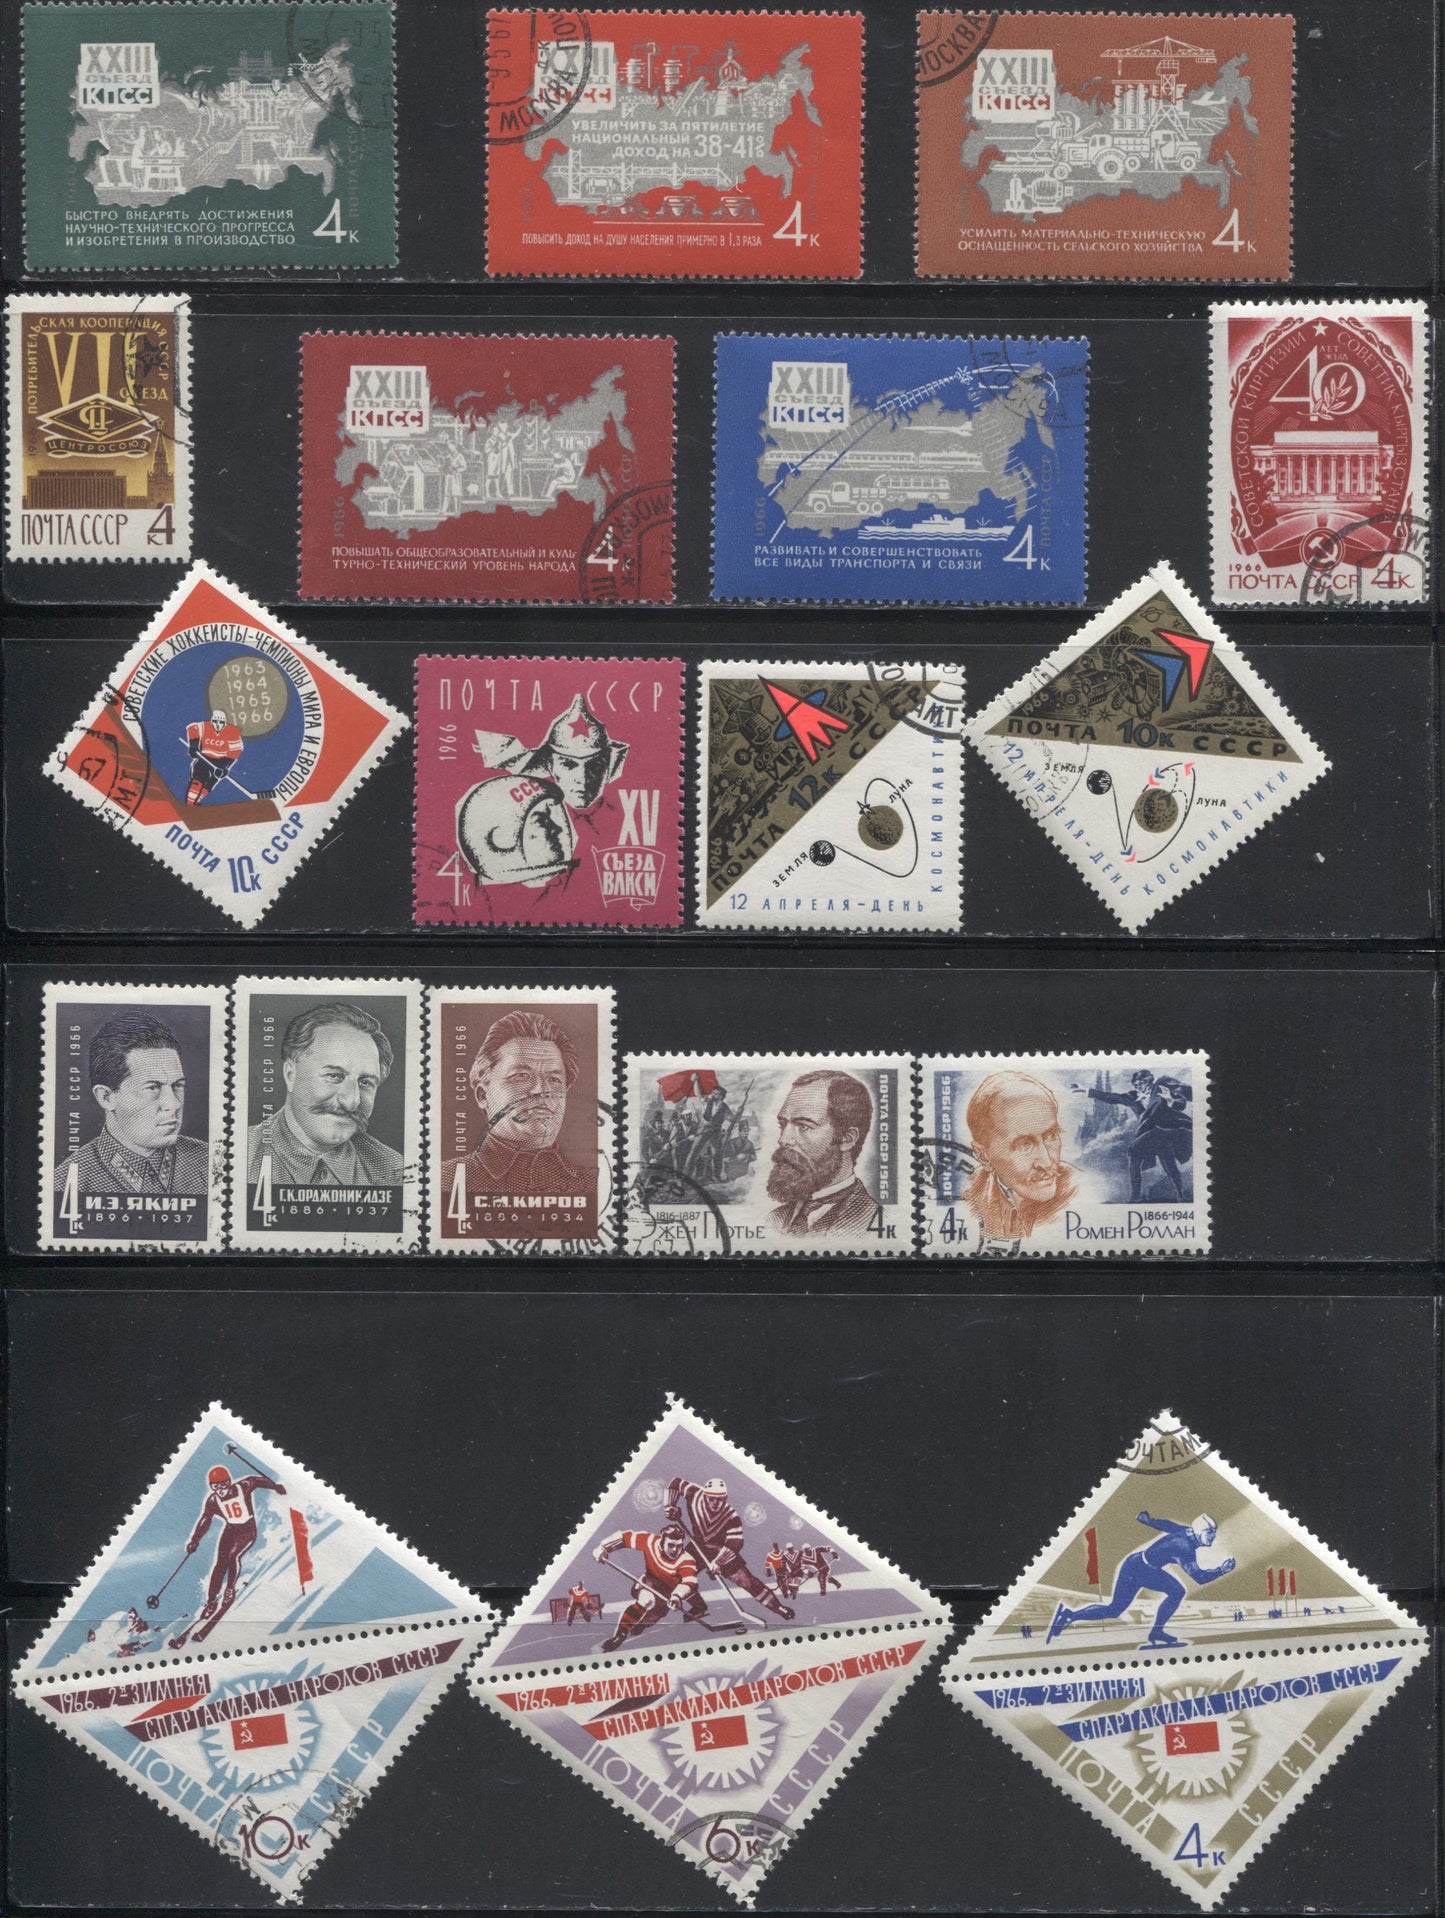 Lot 135 Russia #3154/3276 1966 Commemoratives, A VF CTO Used Group of 23 Commemorative Sets and 1 Definitive Set